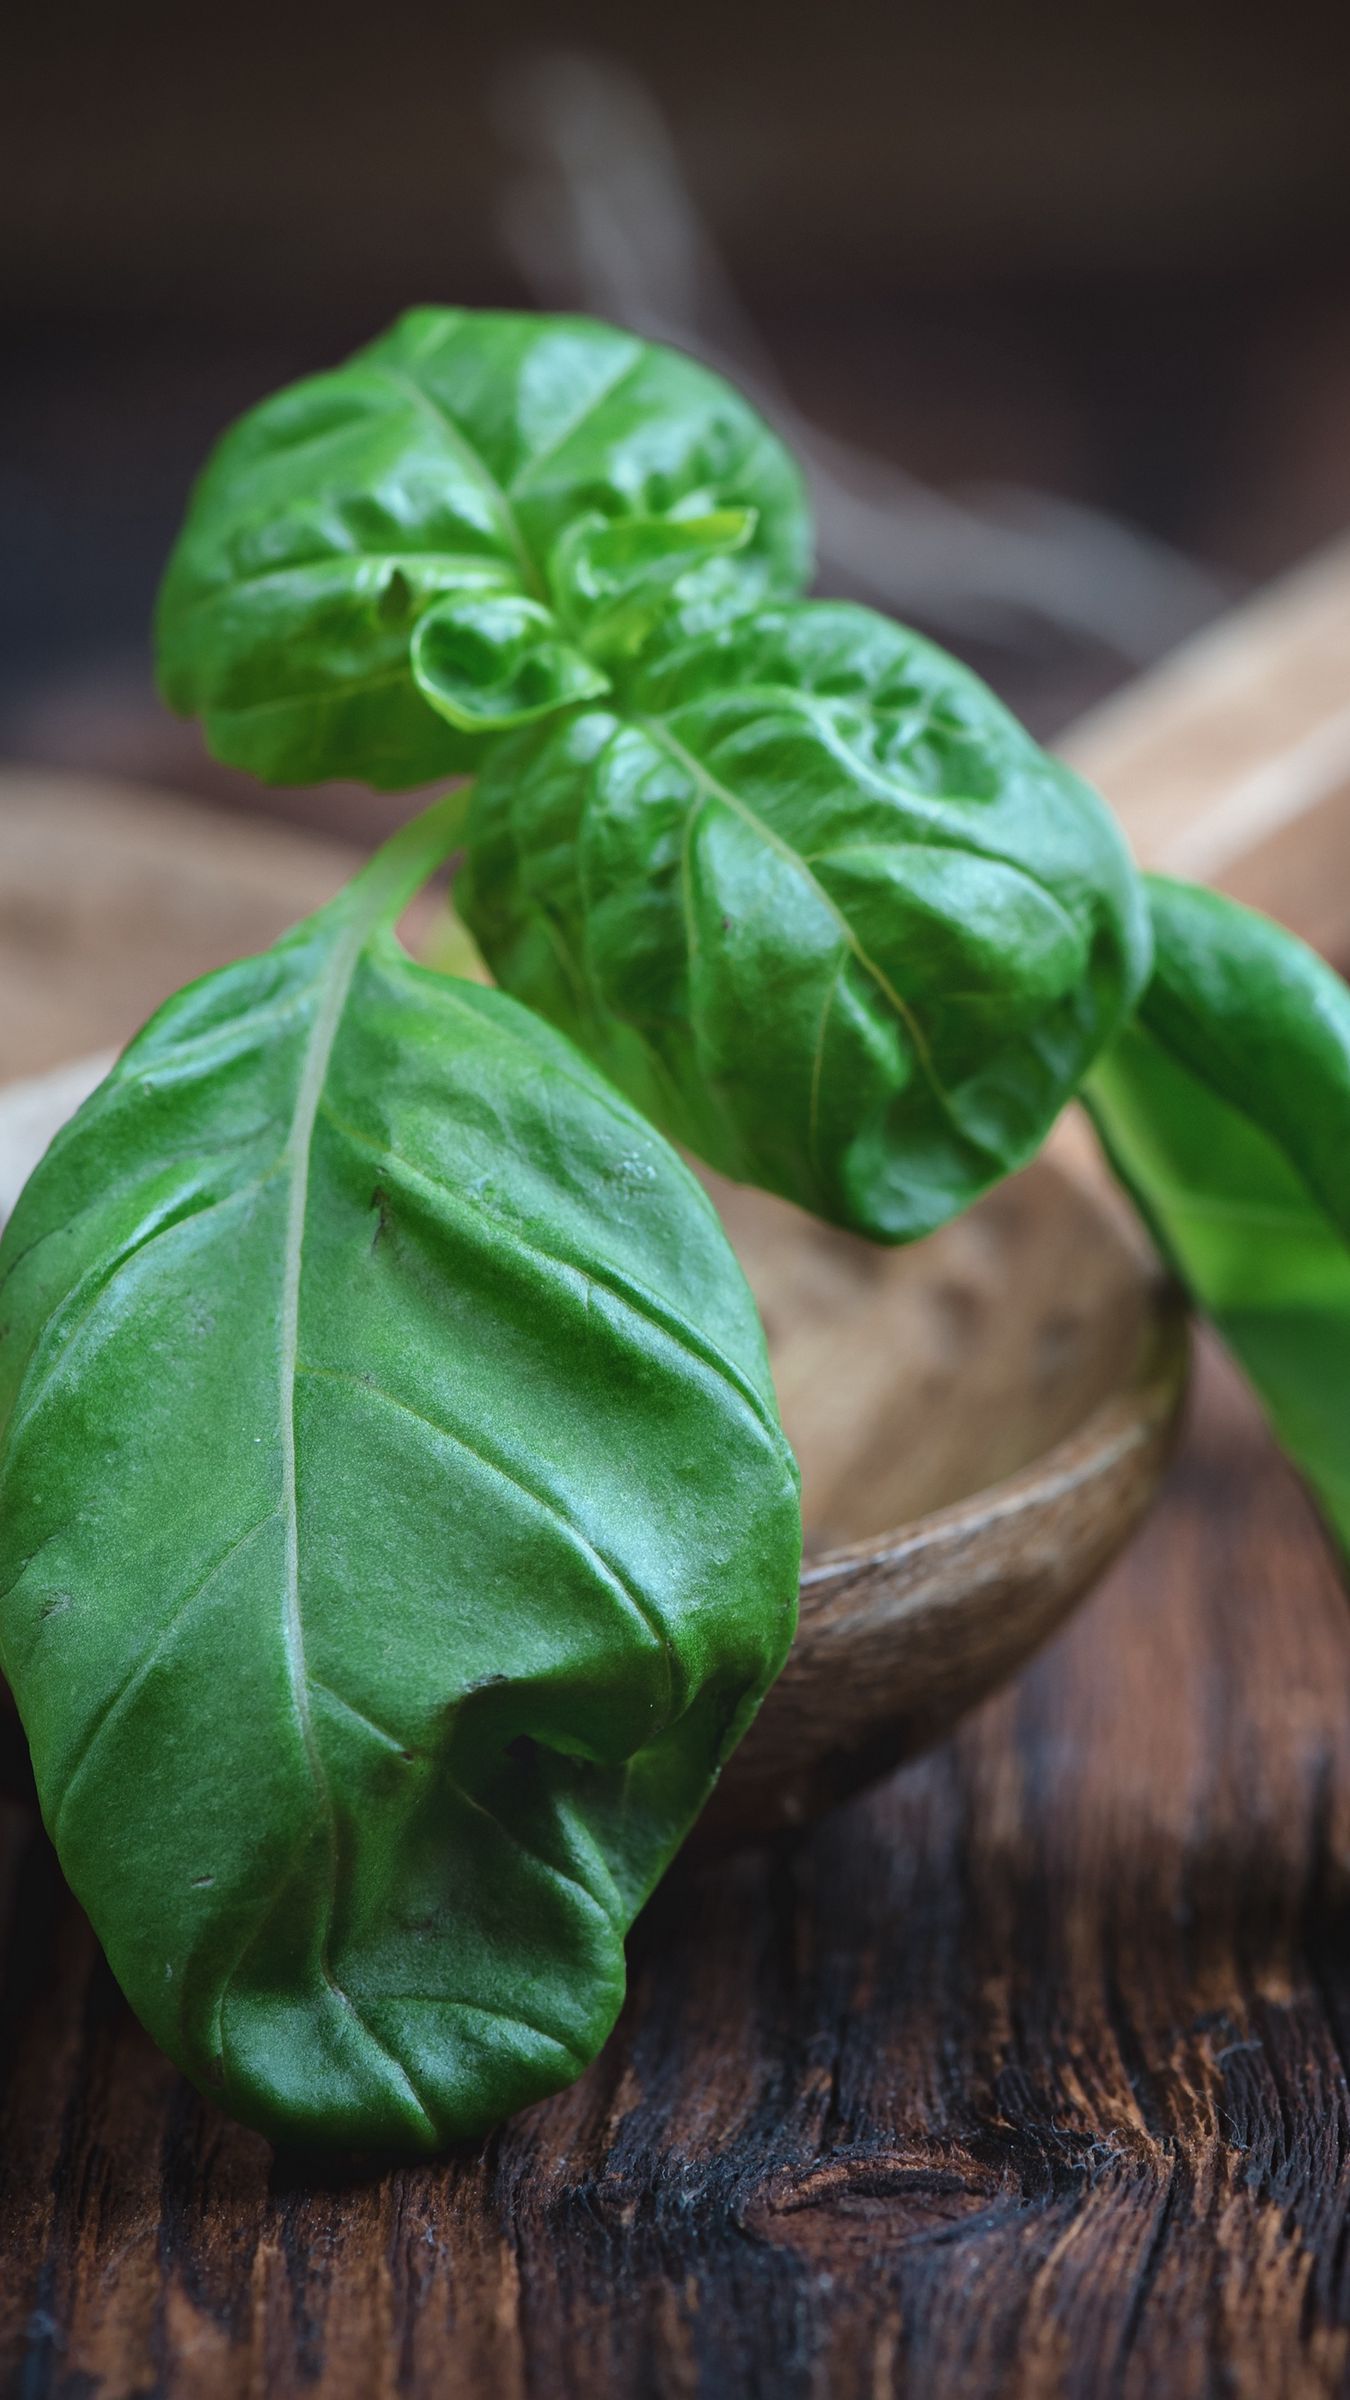 Download wallpaper 1350x2400 basil, herbs, kitchen utensils iphone 8+/7+/6s+/for parallax HD background